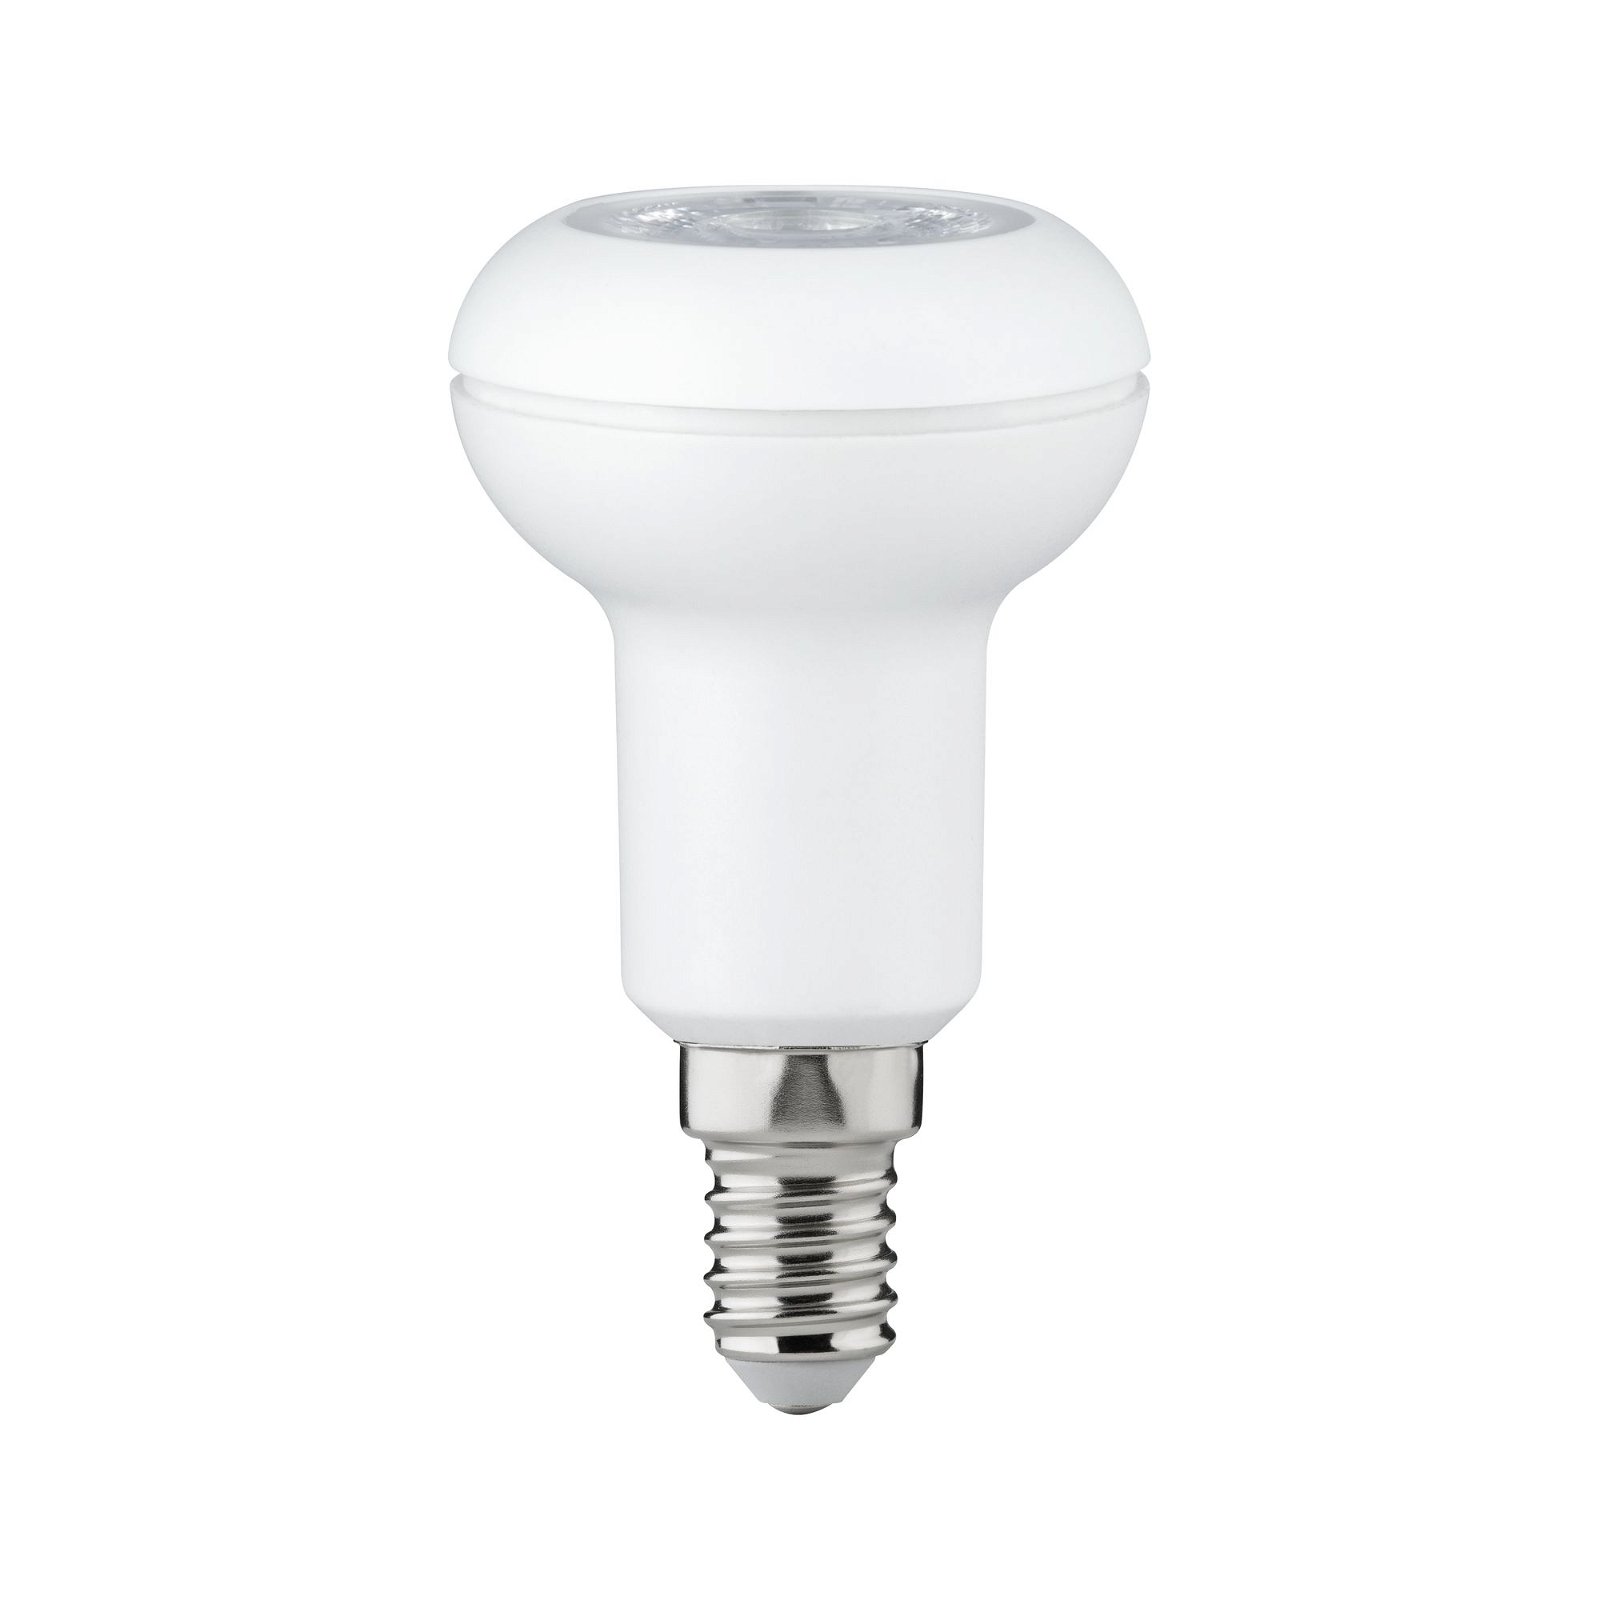 Lampe à incandescence LED E14 dimmable pointe bougie opale 3W 250 lm 2350K